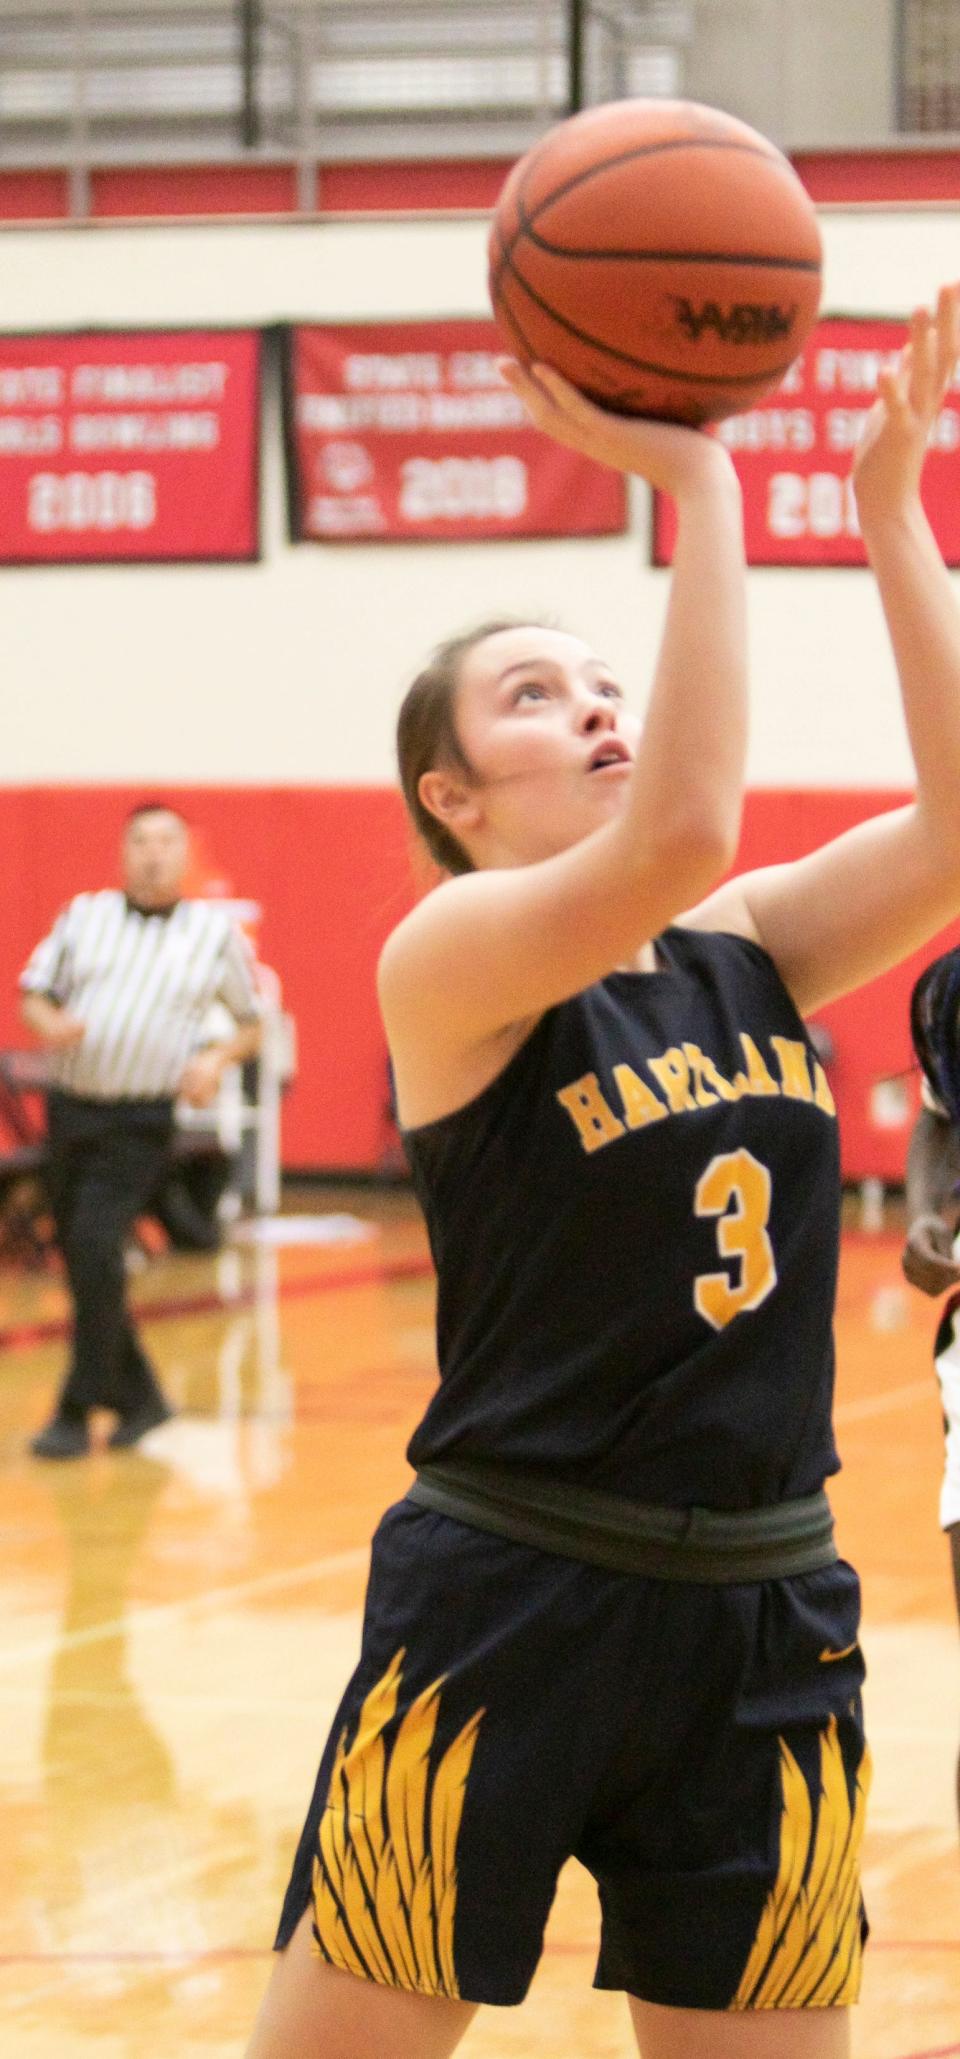 Hartland’s Jaylen Nokovich scored a key basket late in the game to maintain the Eagles' cushion in a 51-44 victory over Grand Blanc on Tuesday, Nov. 29, 2022.